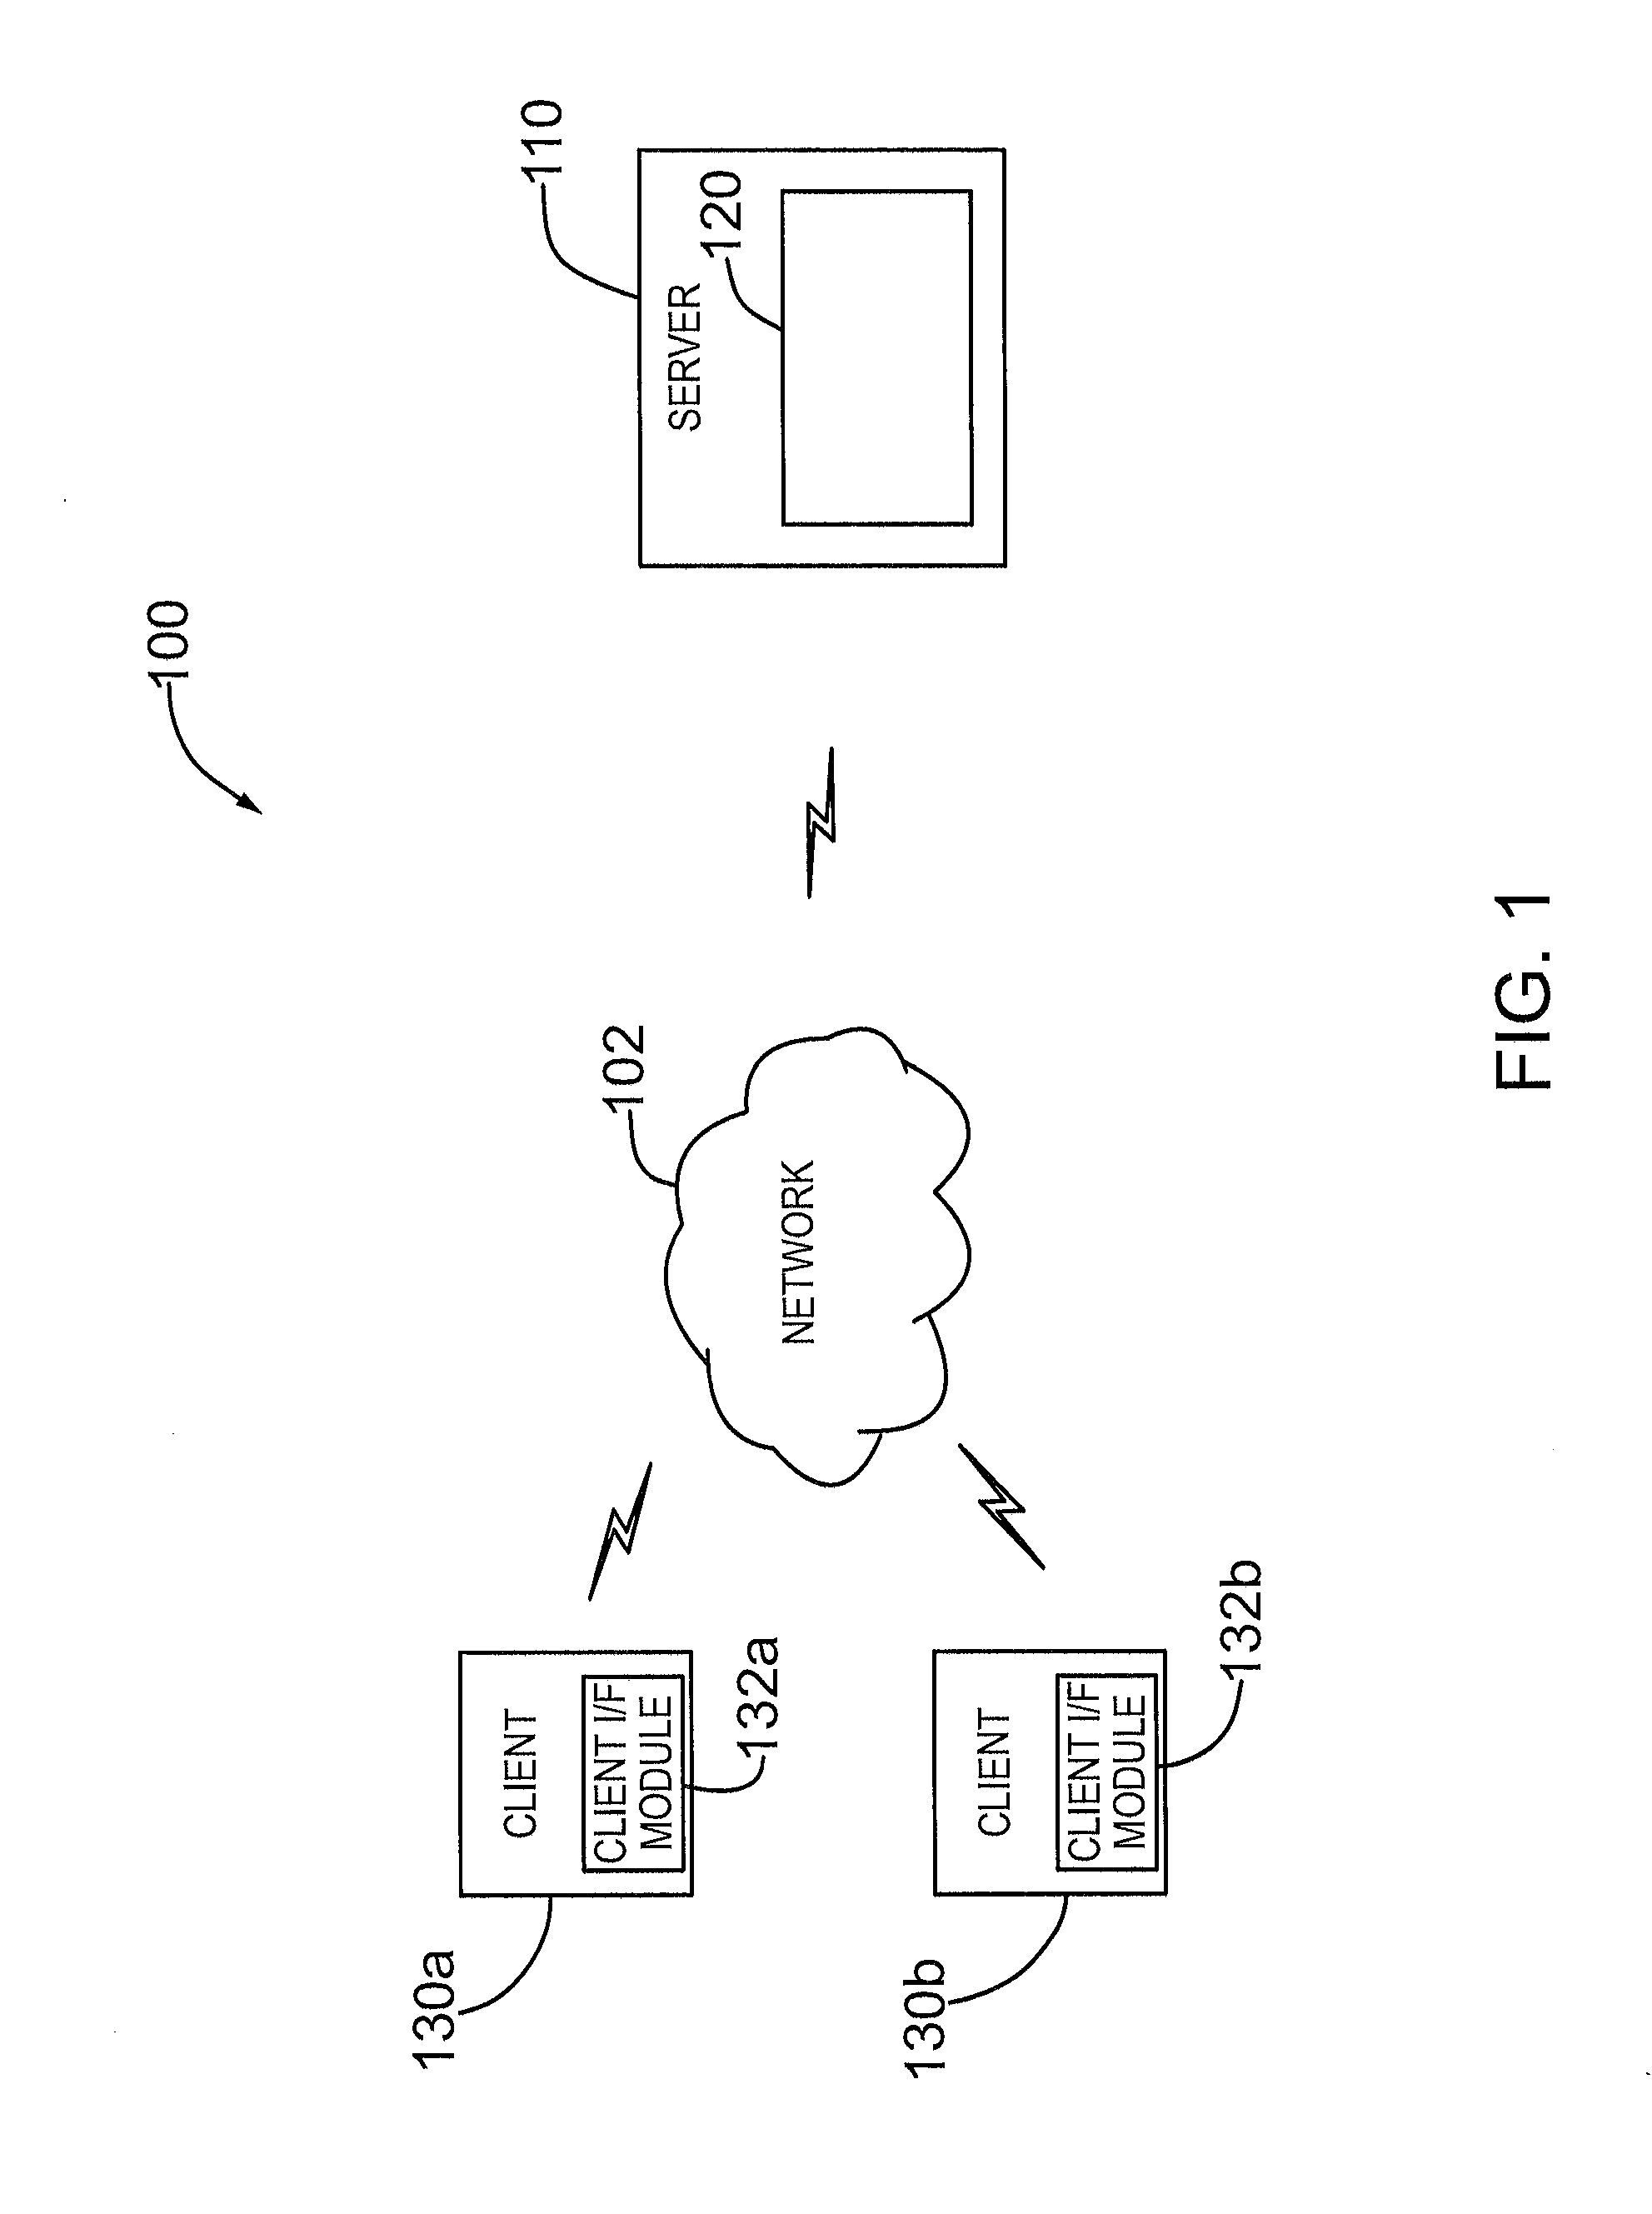 System and method for determining candidates for a role in an organization